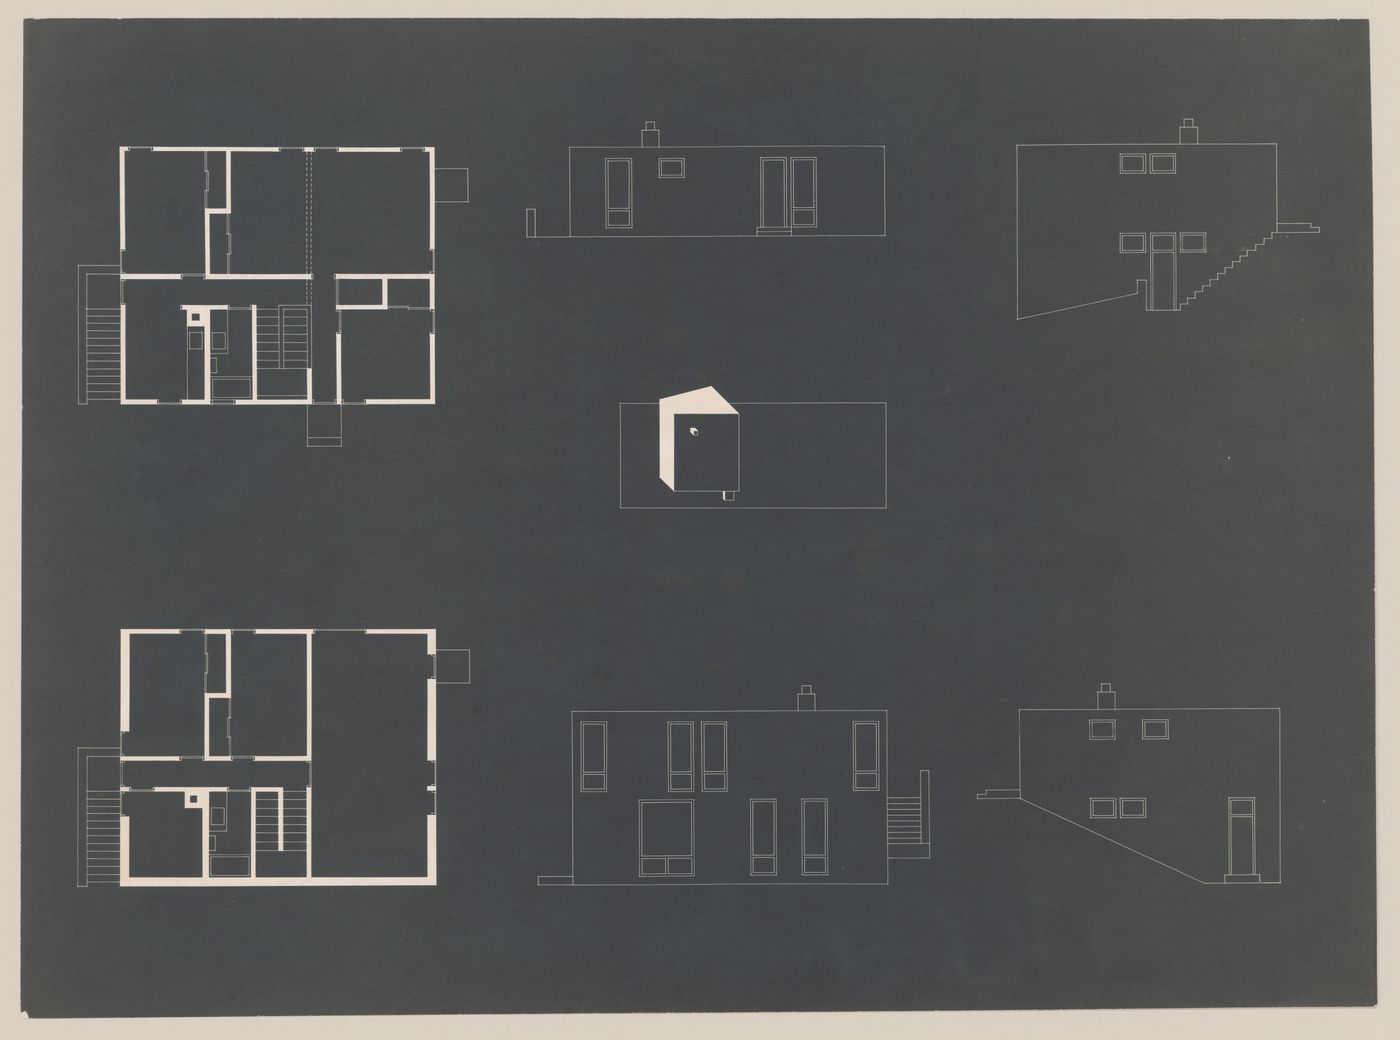 Plans and elevations for Economy House II